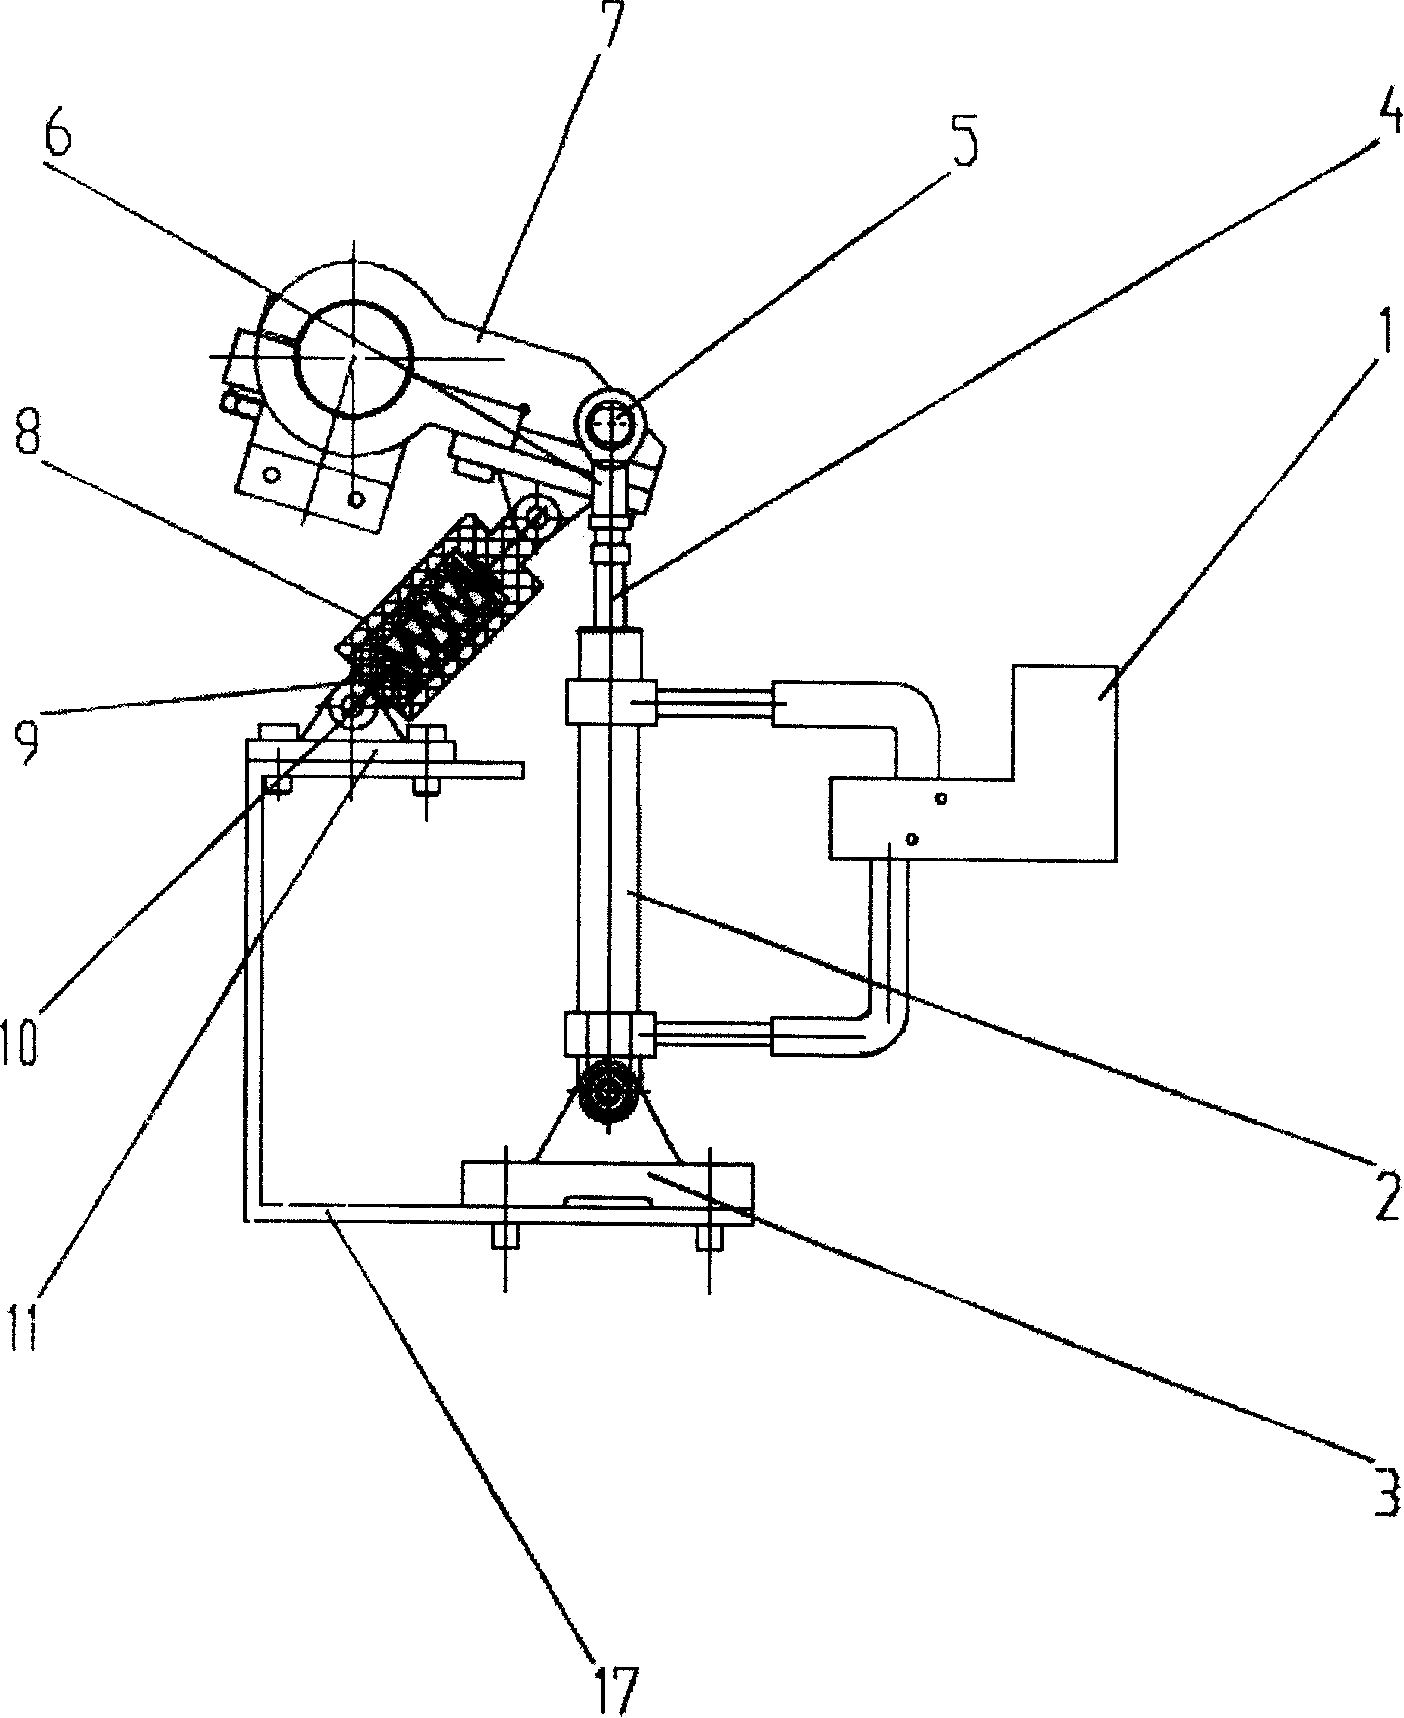 Elevator apparatus of pony roll support